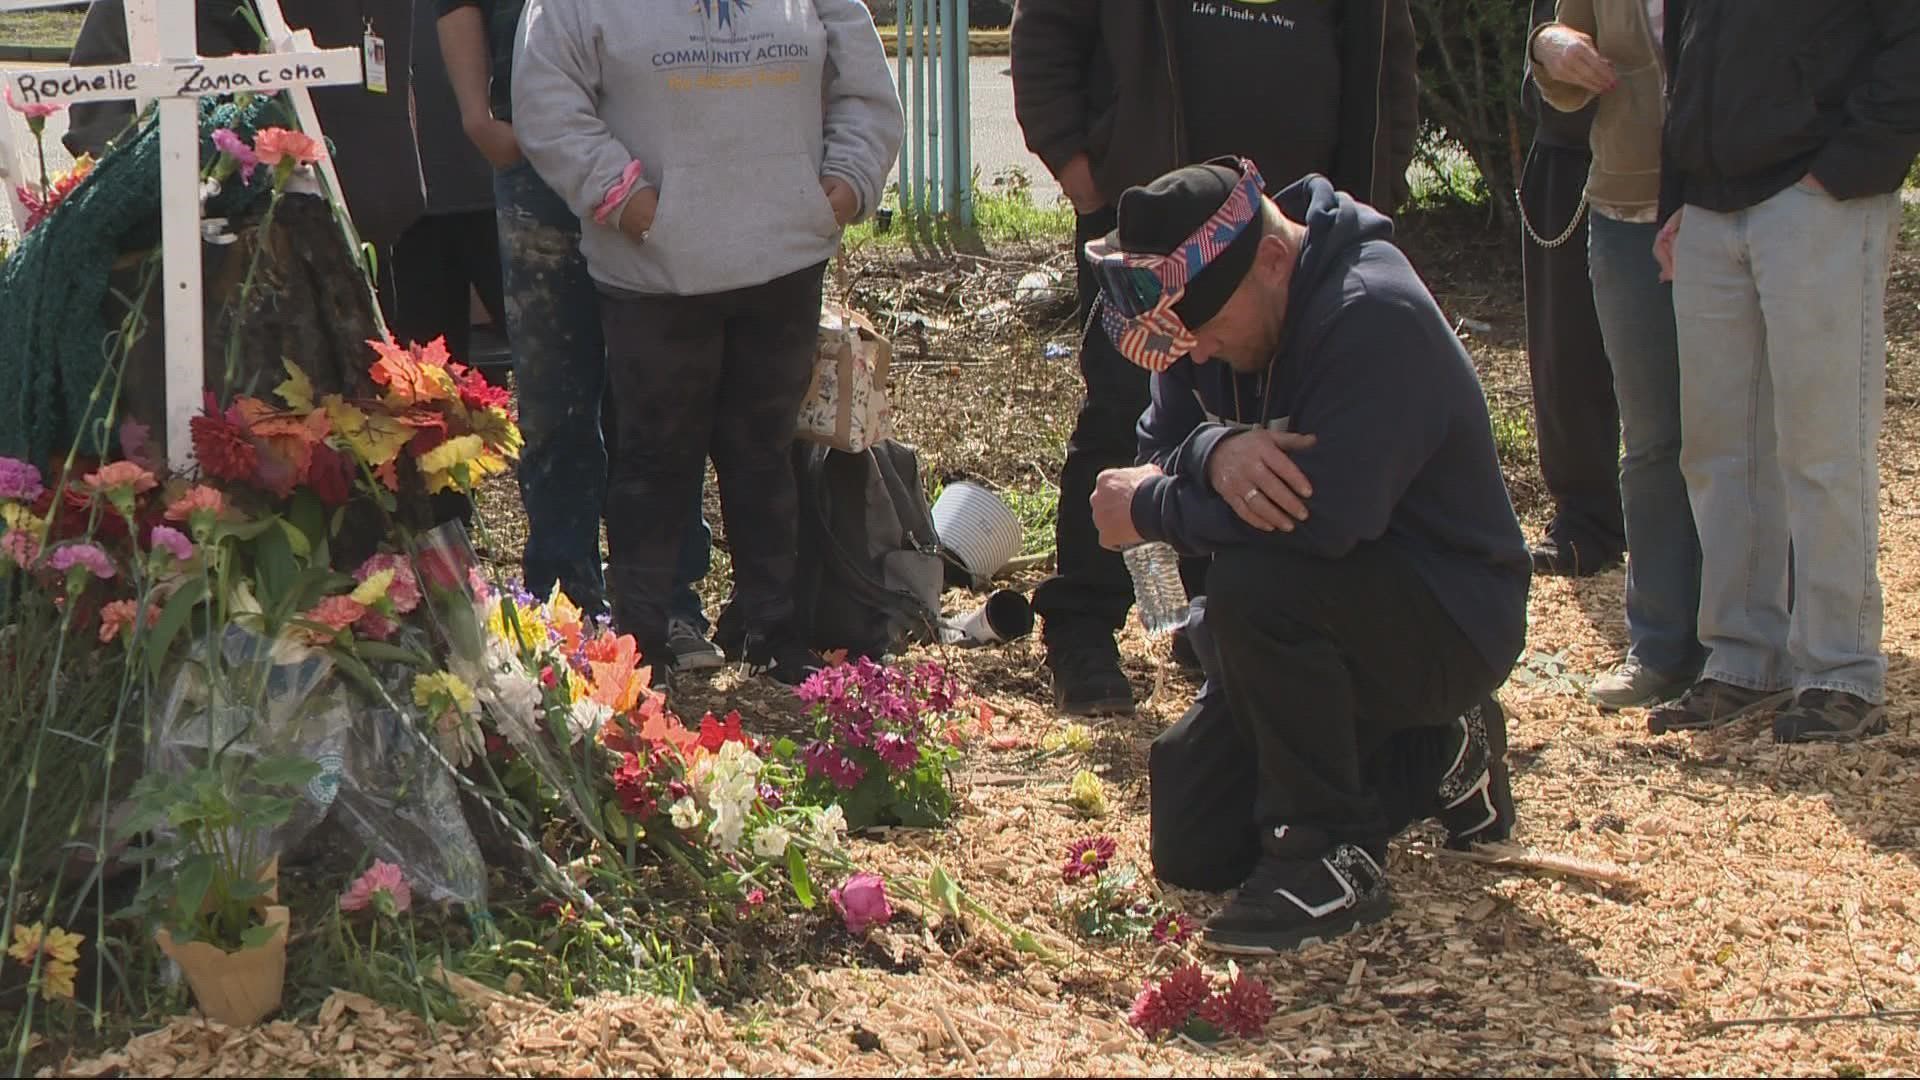 After being scattered by ODOT crews clearing homeless camps around Salem roadways, people who knew the four victims returned to pay their respects.